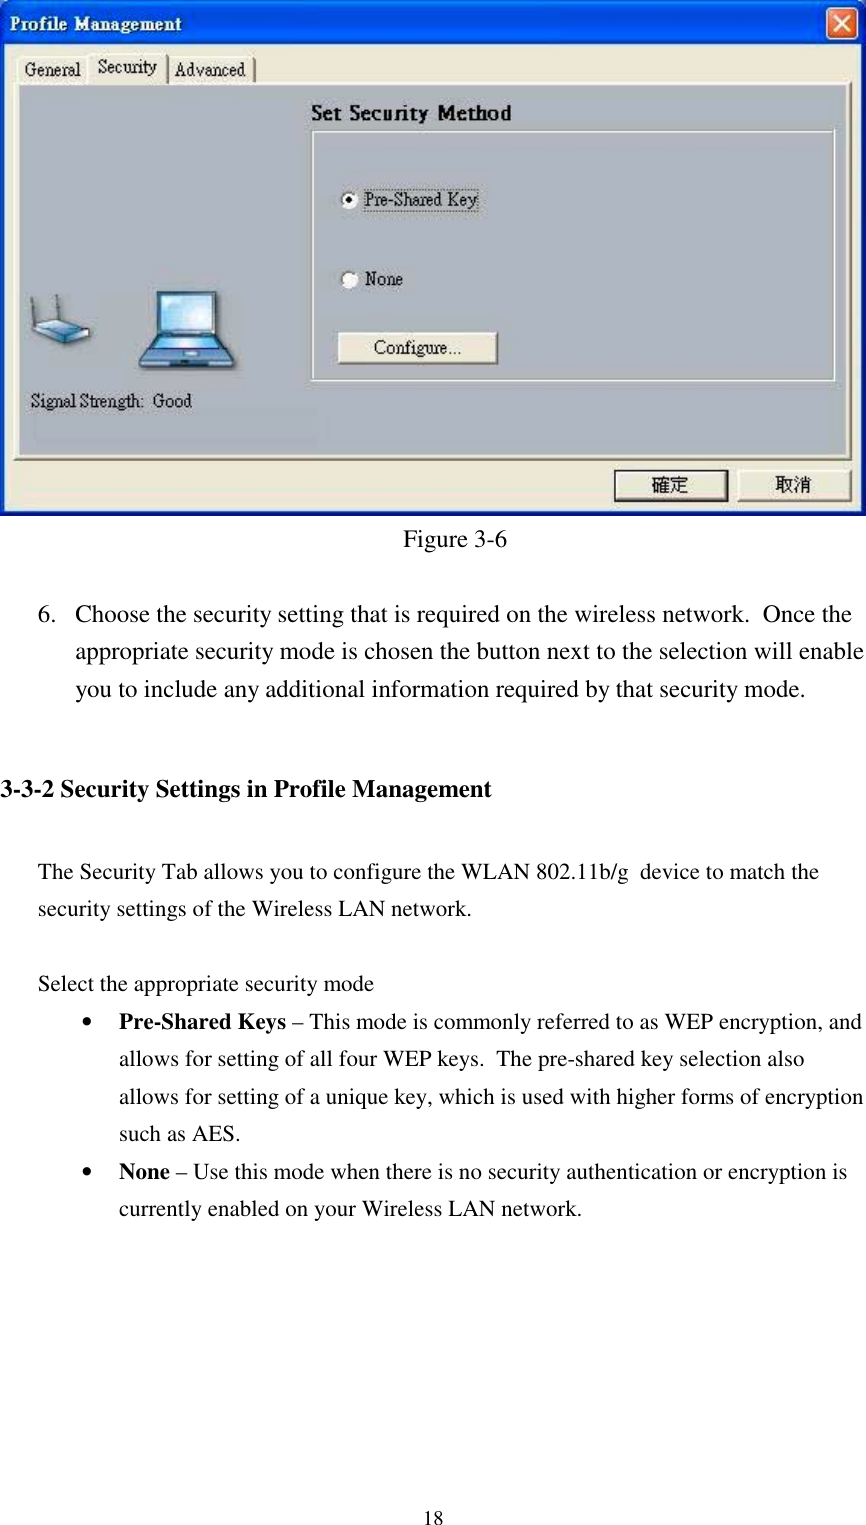 18Figure 3-66. Choose the security setting that is required on the wireless network.  Once theappropriate security mode is chosen the button next to the selection will enableyou to include any additional information required by that security mode.3-3-2 Security Settings in Profile ManagementThe Security Tab allows you to configure the WLAN 802.11b/g  device to match thesecurity settings of the Wireless LAN network.Select the appropriate security mode• Pre-Shared Keys – This mode is commonly referred to as WEP encryption, andallows for setting of all four WEP keys.  The pre-shared key selection alsoallows for setting of a unique key, which is used with higher forms of encryptionsuch as AES.• None – Use this mode when there is no security authentication or encryption iscurrently enabled on your Wireless LAN network.